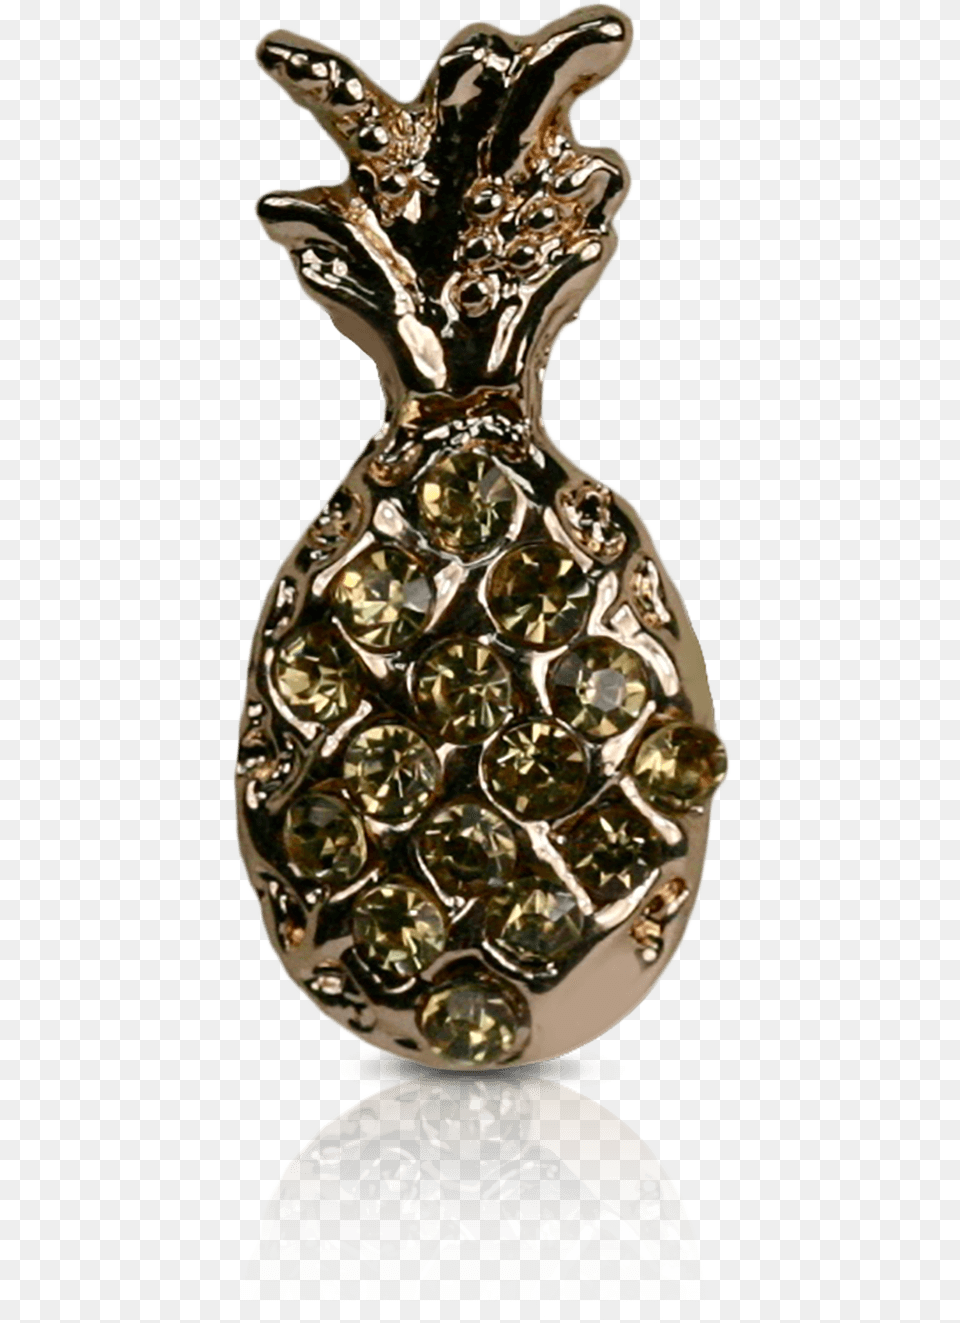 Vase, Accessories, Jewelry, Necklace Png Image